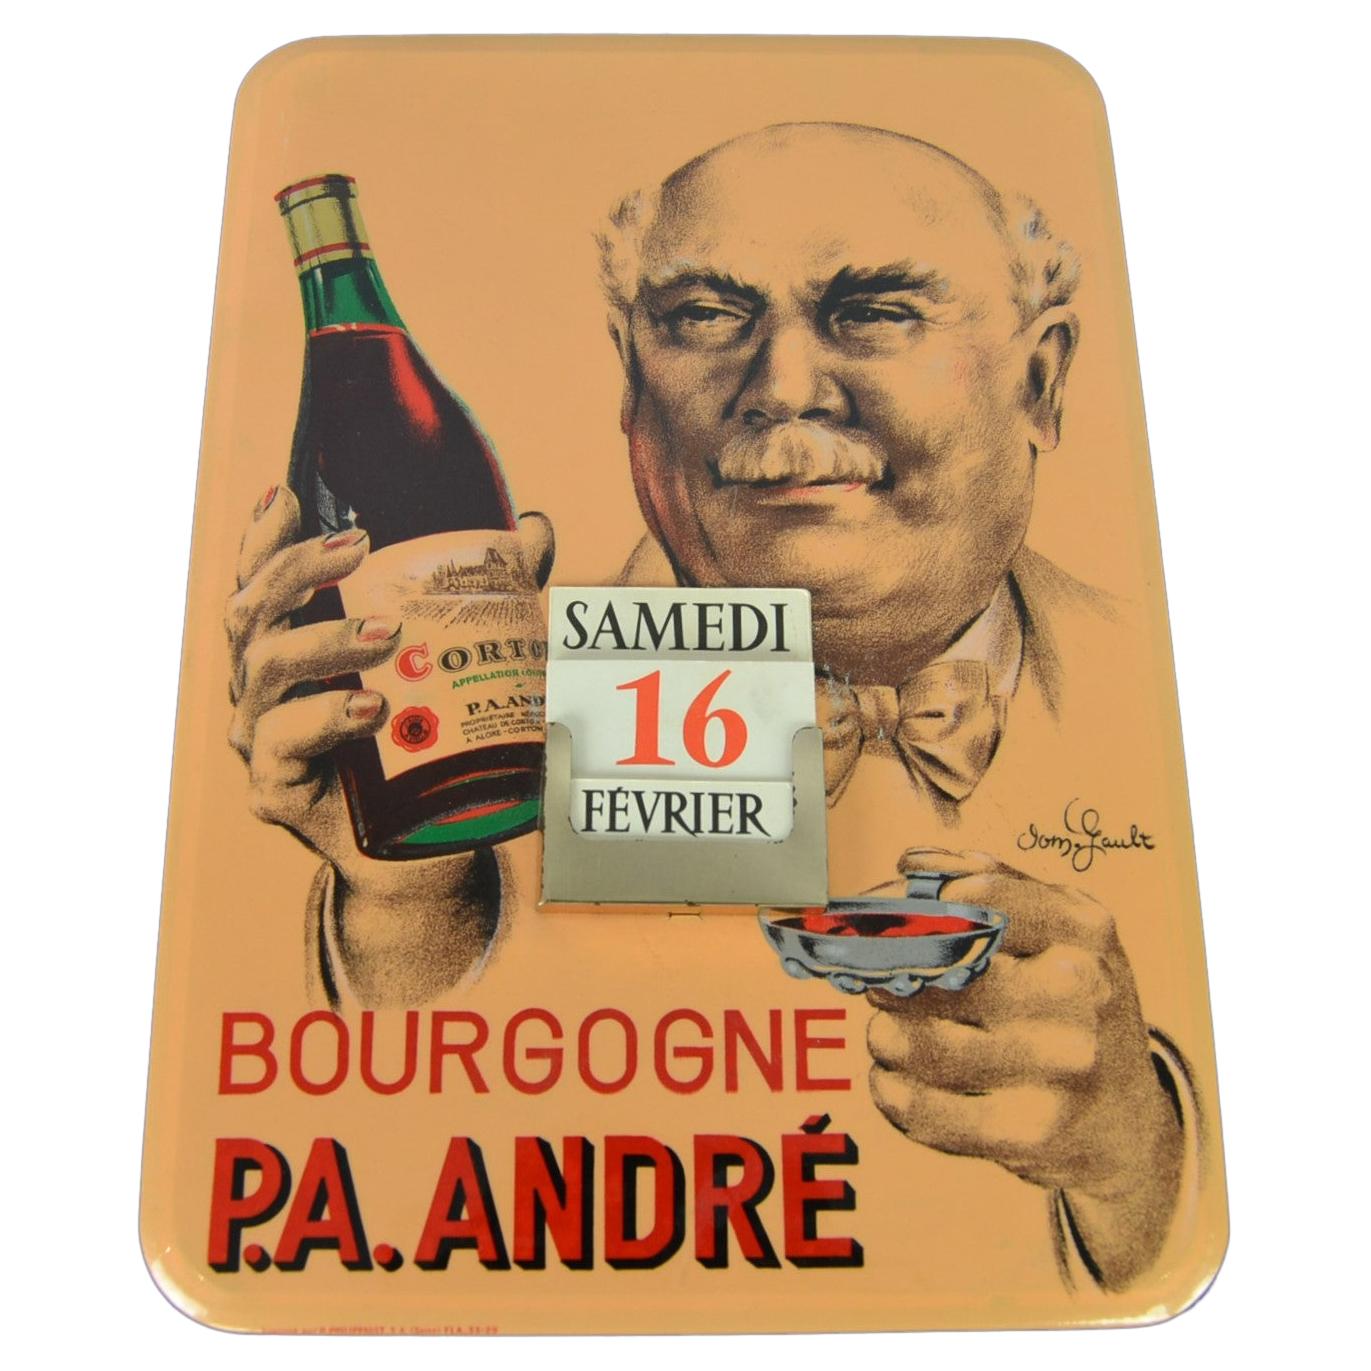 Old Advertising Sign with Calendar for French Wine